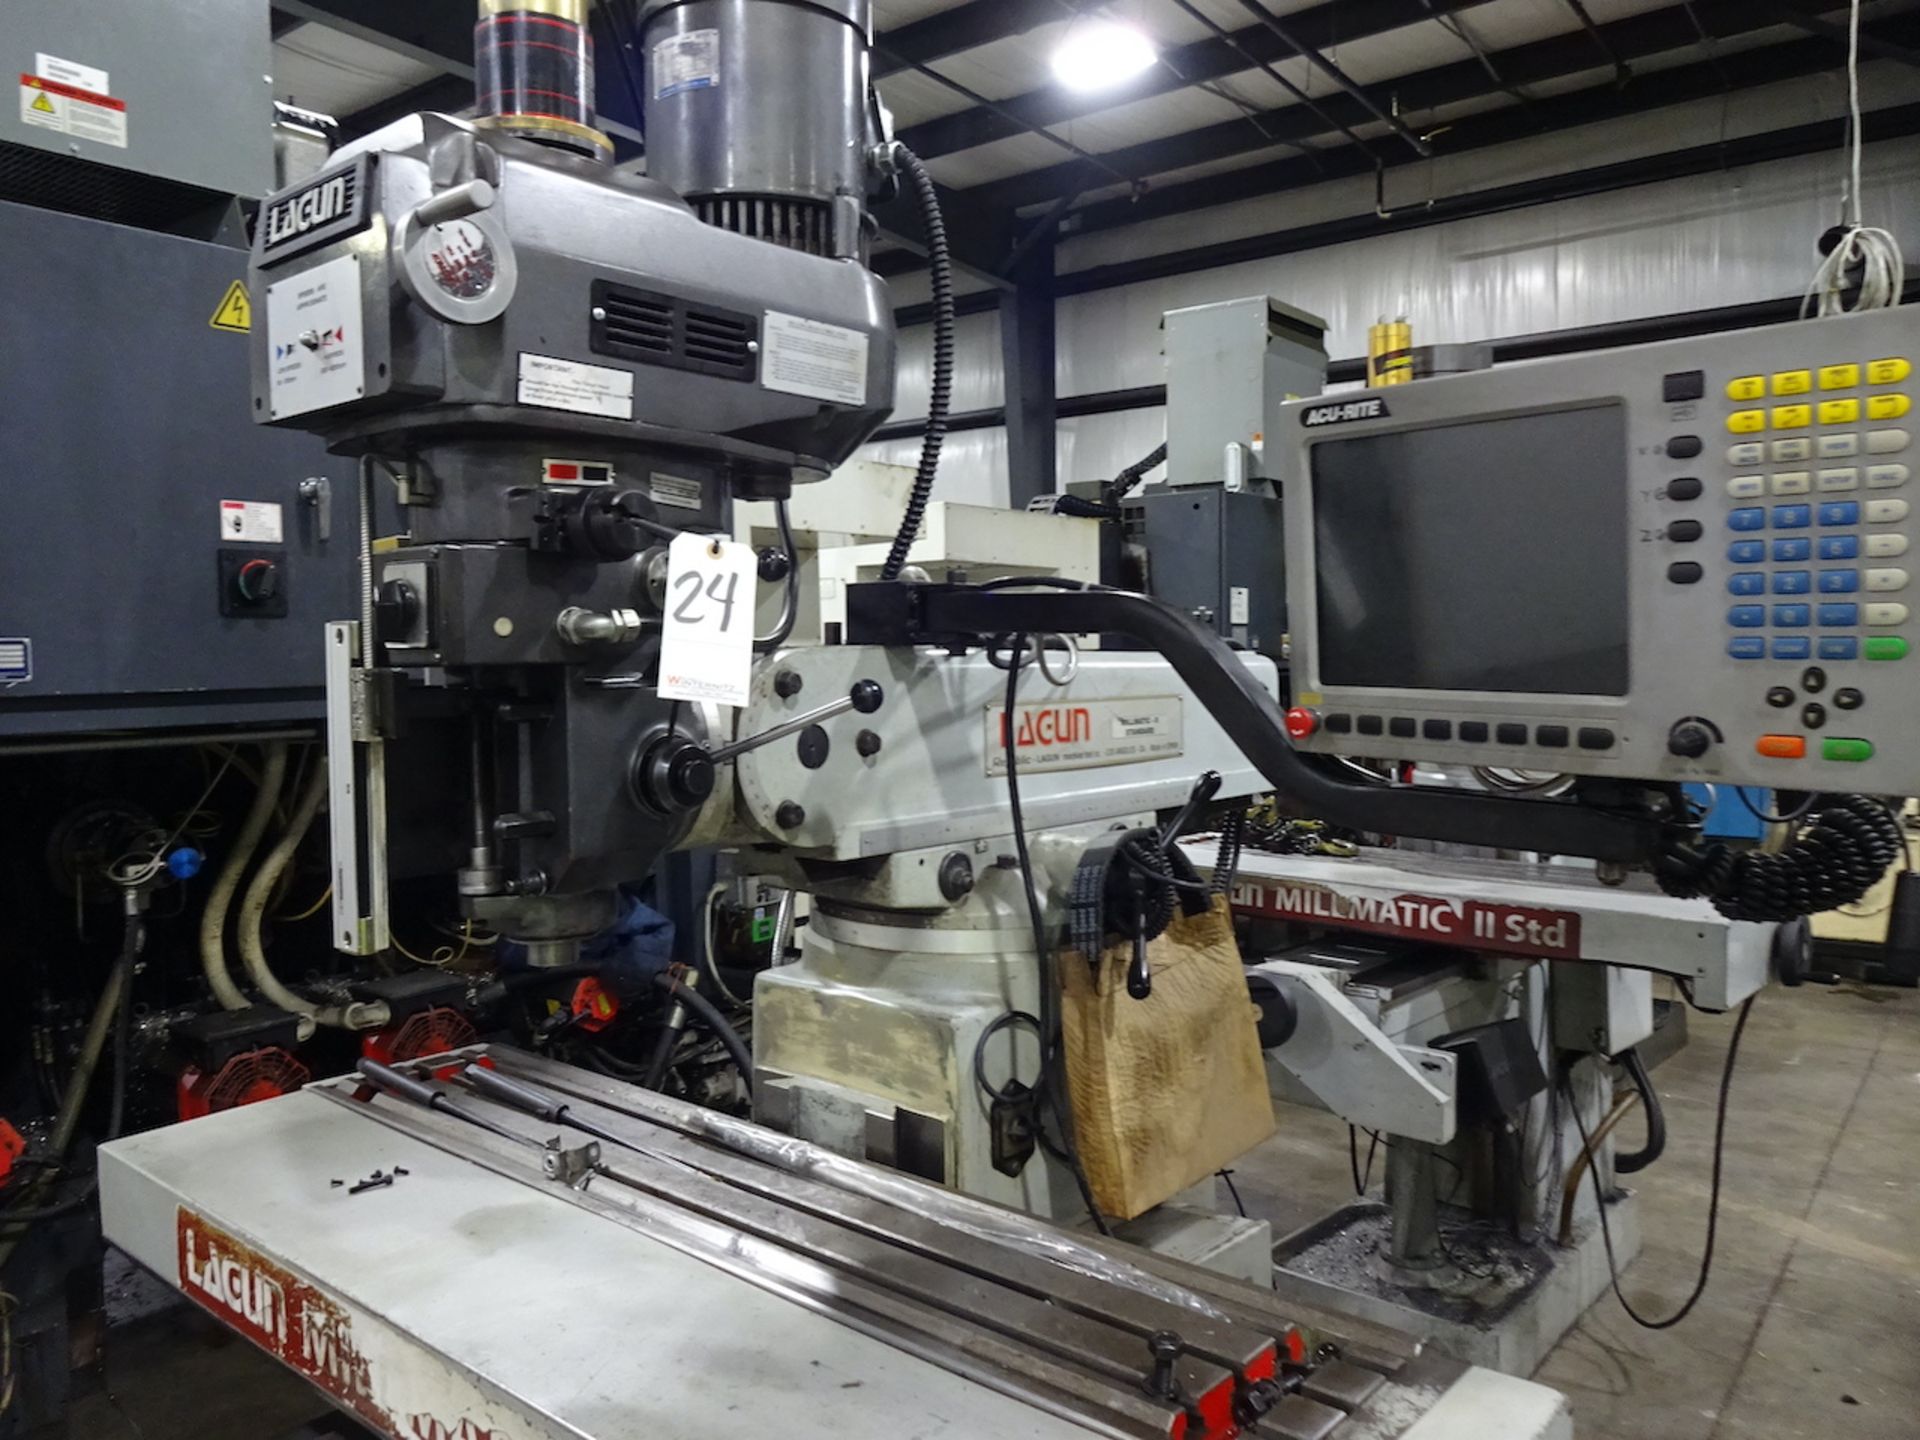 LAGUN 3HP MILLMATIC II 2 AXIS CNC VERTICAL KNEE MILL (2013) S/N 45006, 10 X 50 TABLE, 4200 RPM - Image 9 of 9